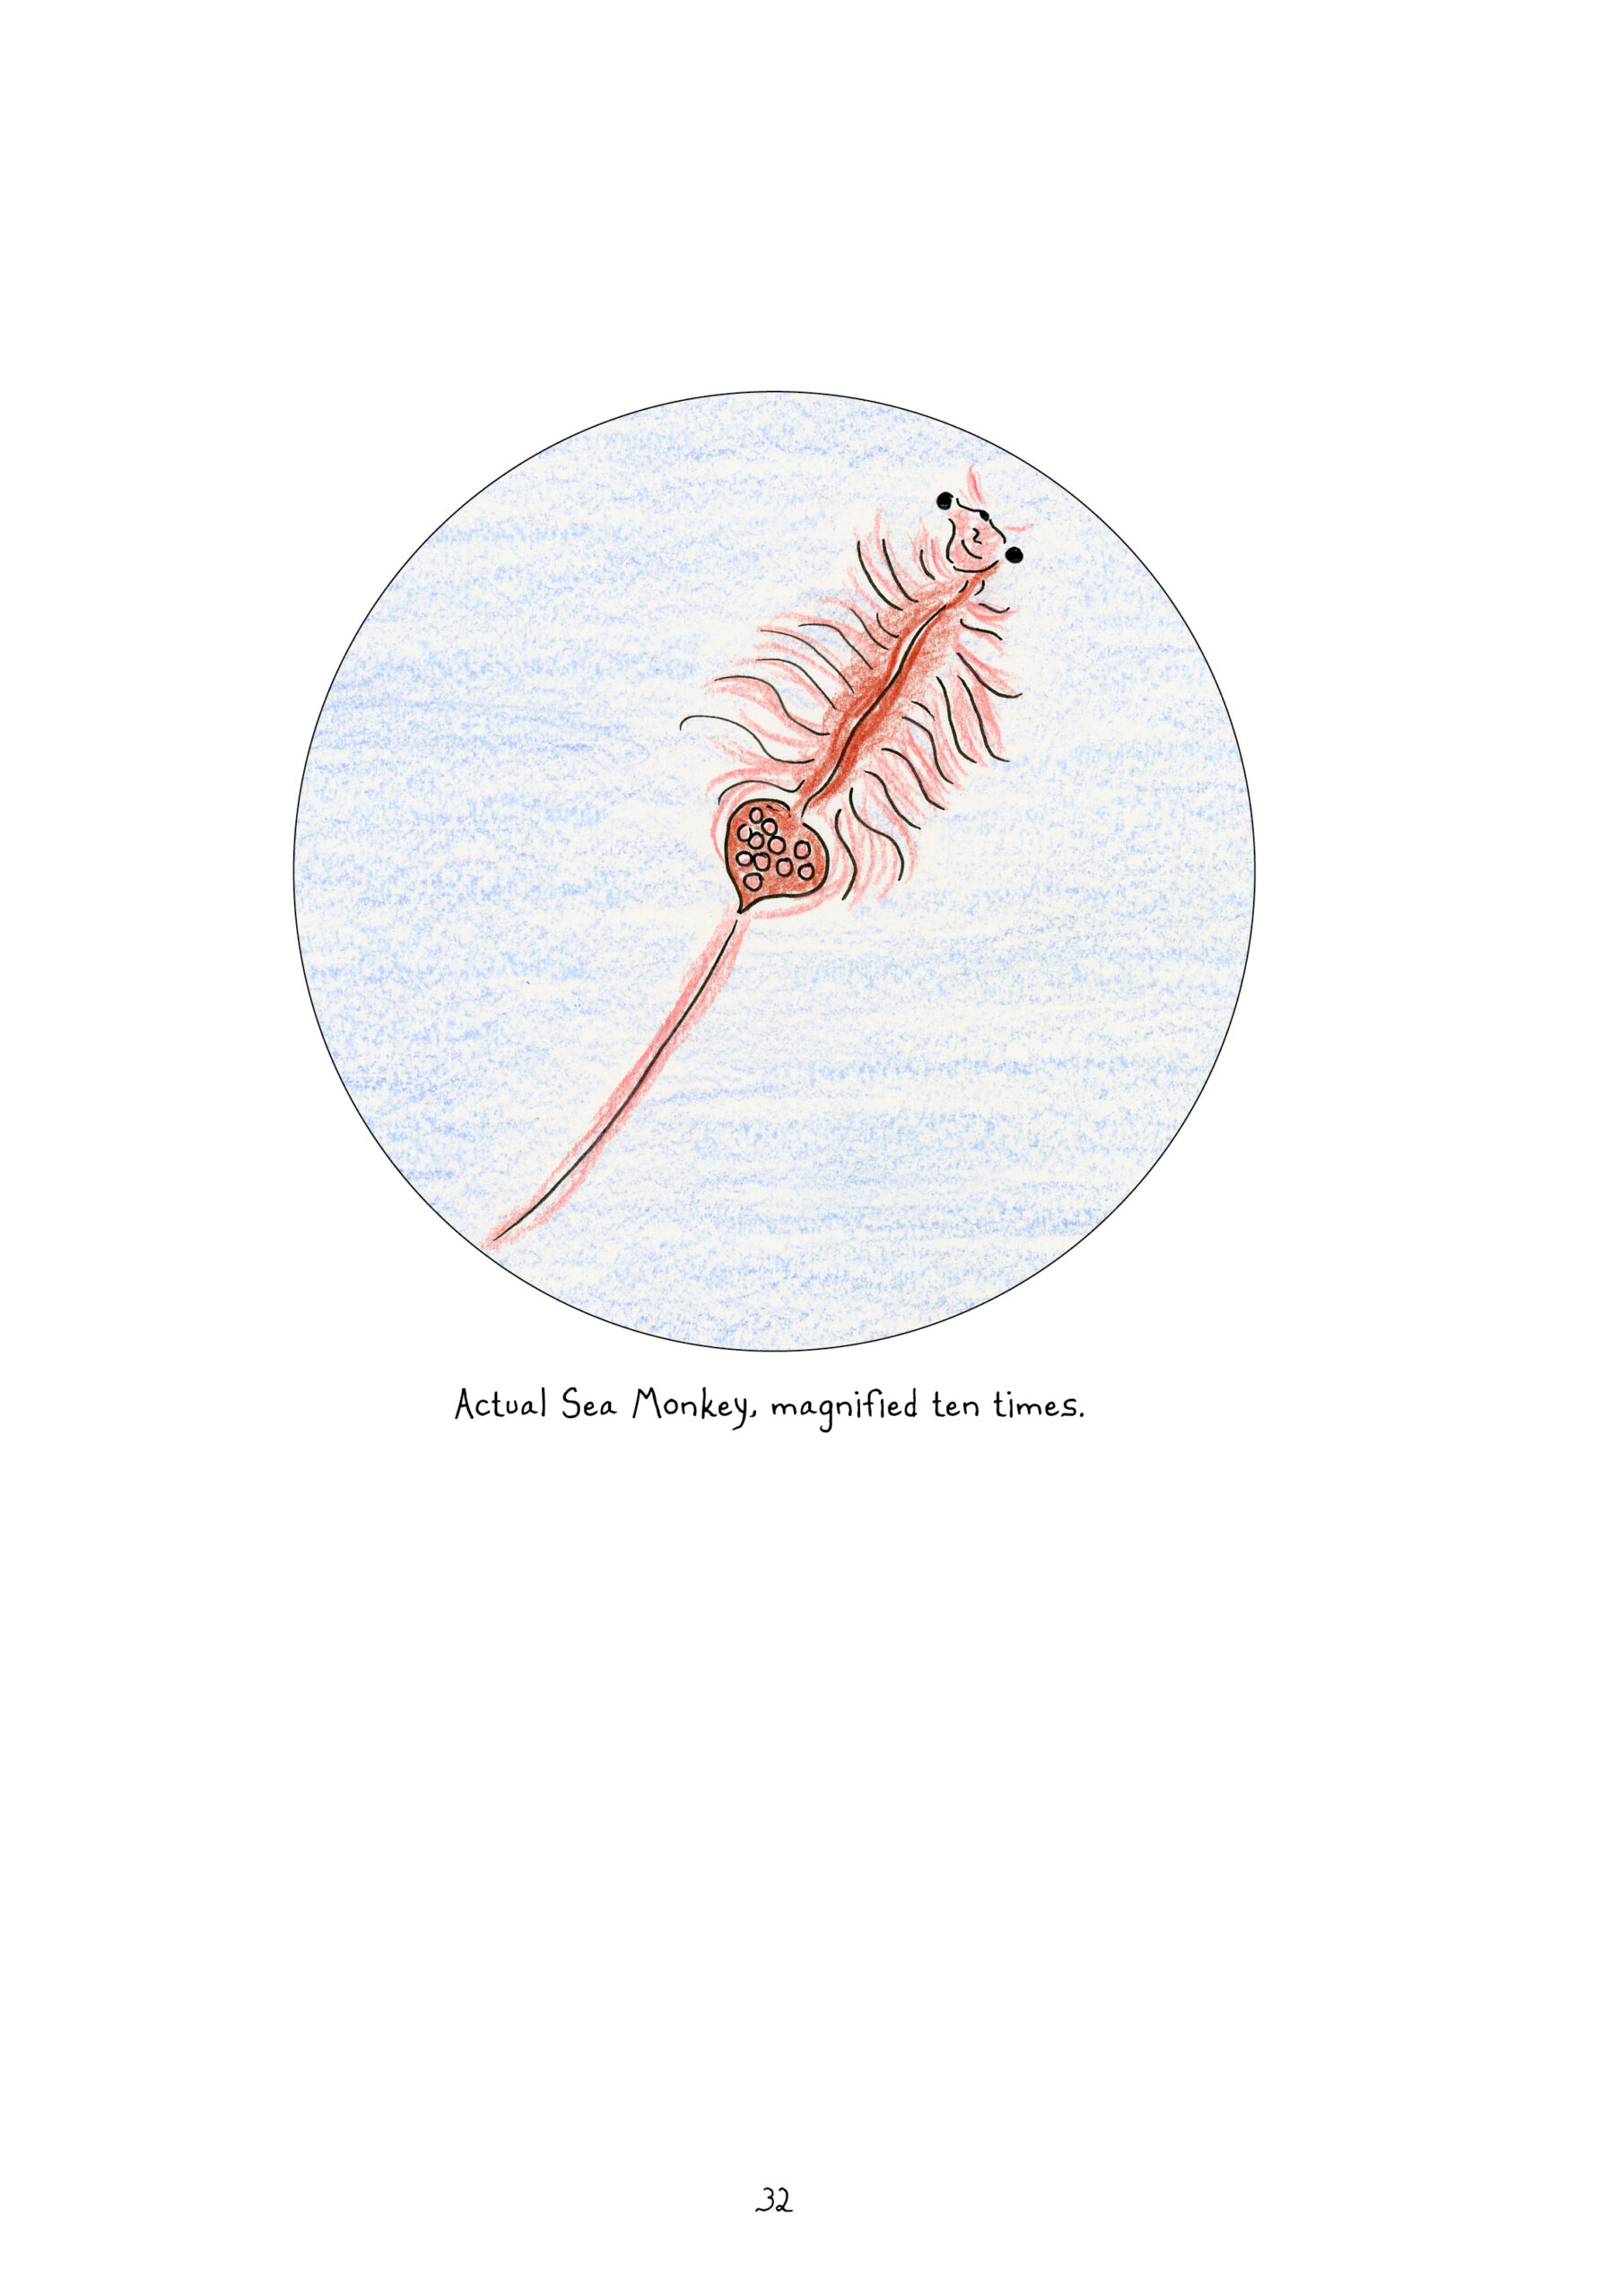 A rusty-colored sea monkey - captioned, "Actual Sea Monkey, magnified ten times" - is enclosed in a blue circle. The sea monkey appears to be smiling. It has little antennae. It looks like a long thin shrimp (it is technically a brine shrimp). Its torso has wispy appendages. Below the torso is an egg sac and a long gut like a worm's, resembling a tail.